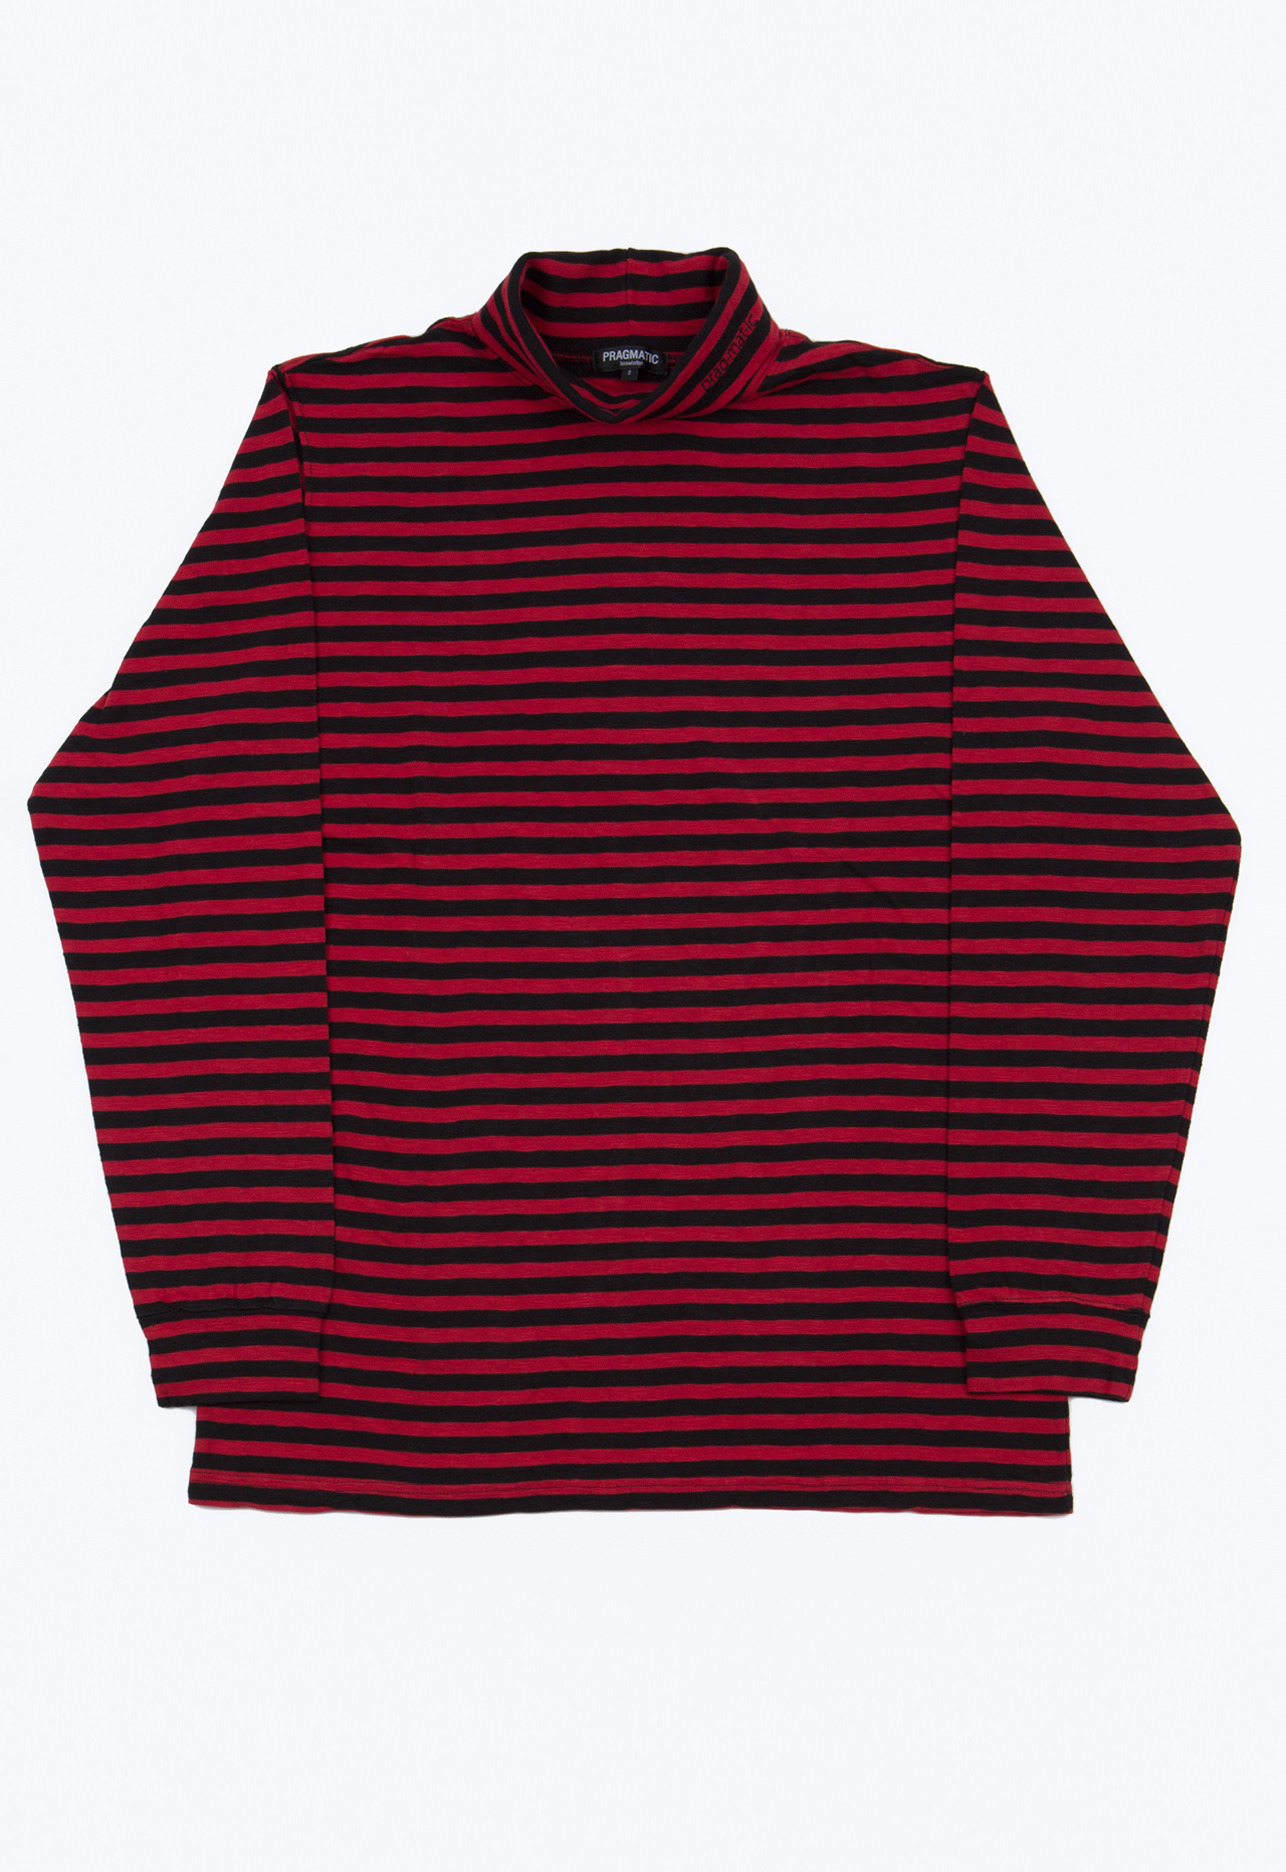 TURTLE NECK RED